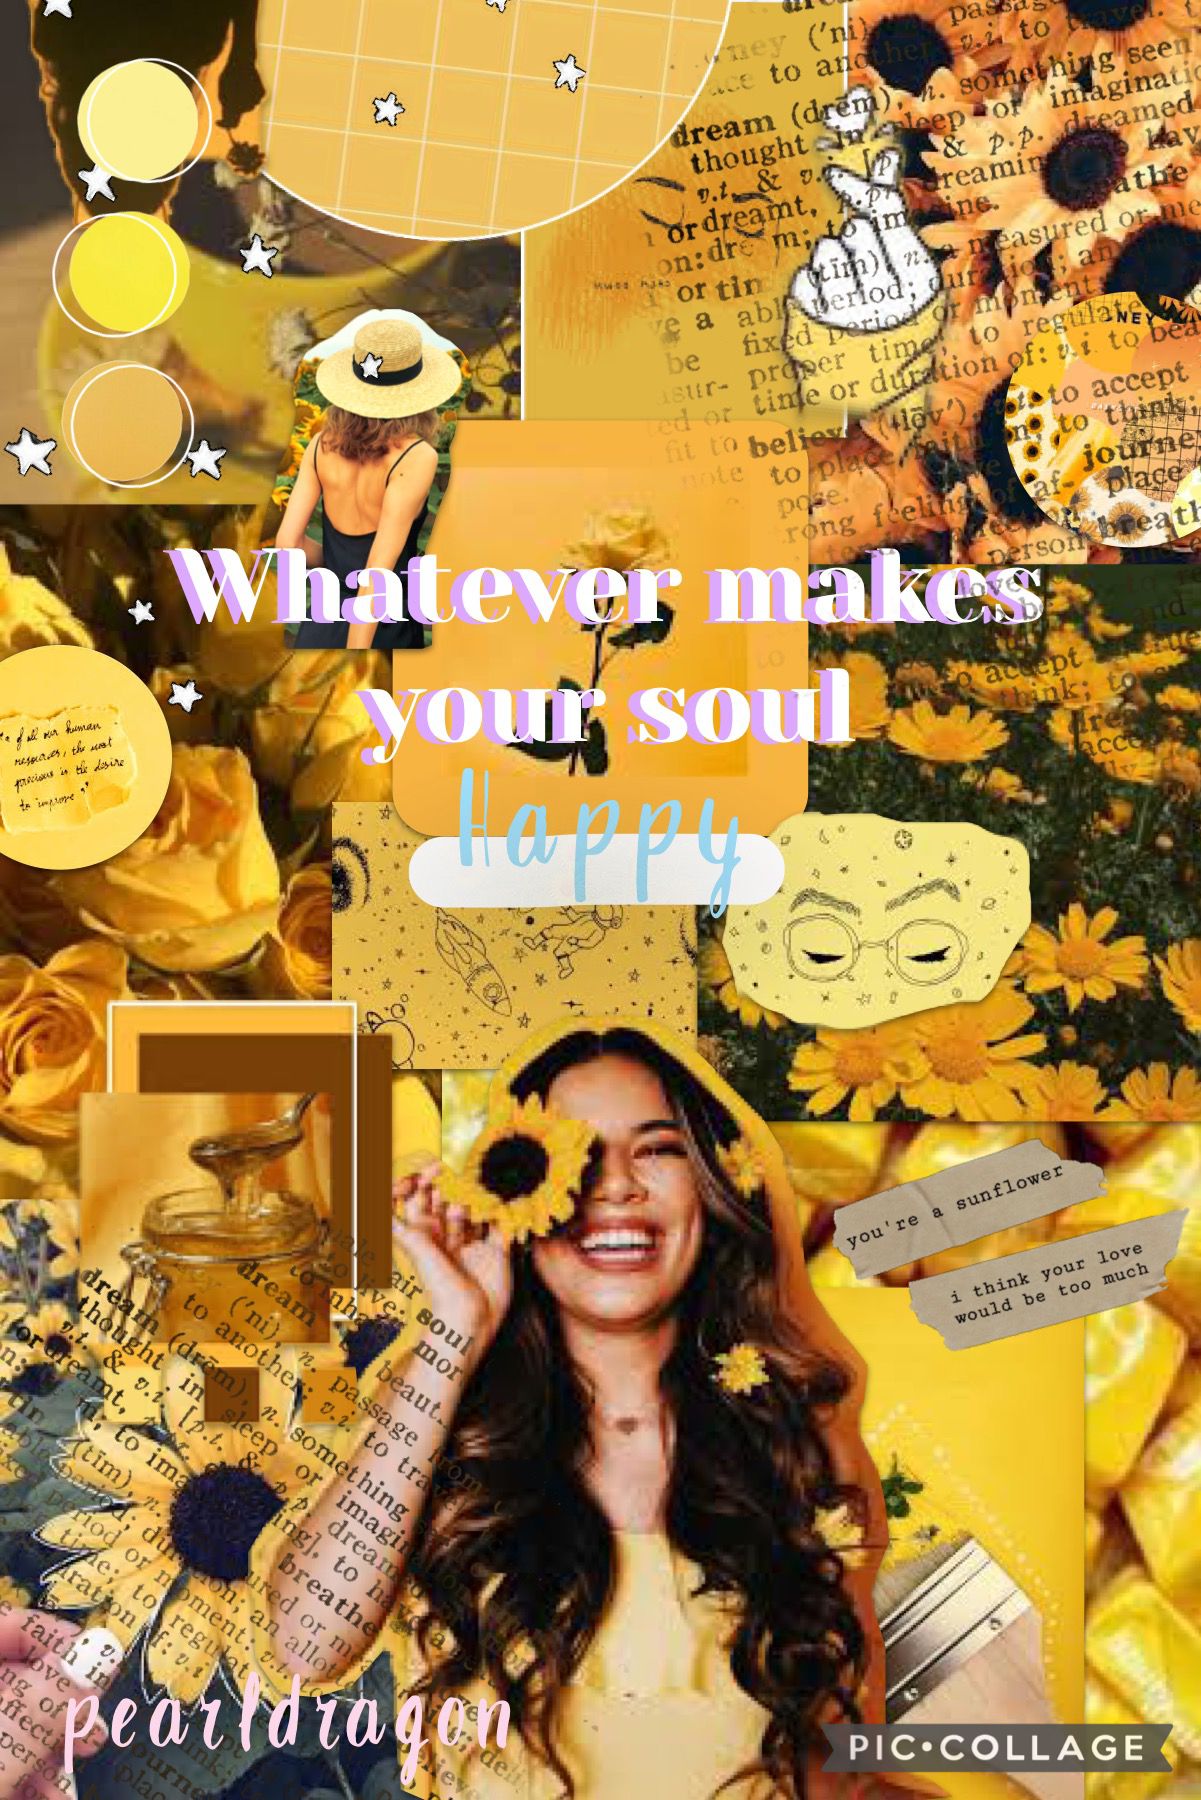 🌻tap🌻
Stay happy Pearls! I know it’s hard sometimes, just let it all out okay?
- Pearl 🥳